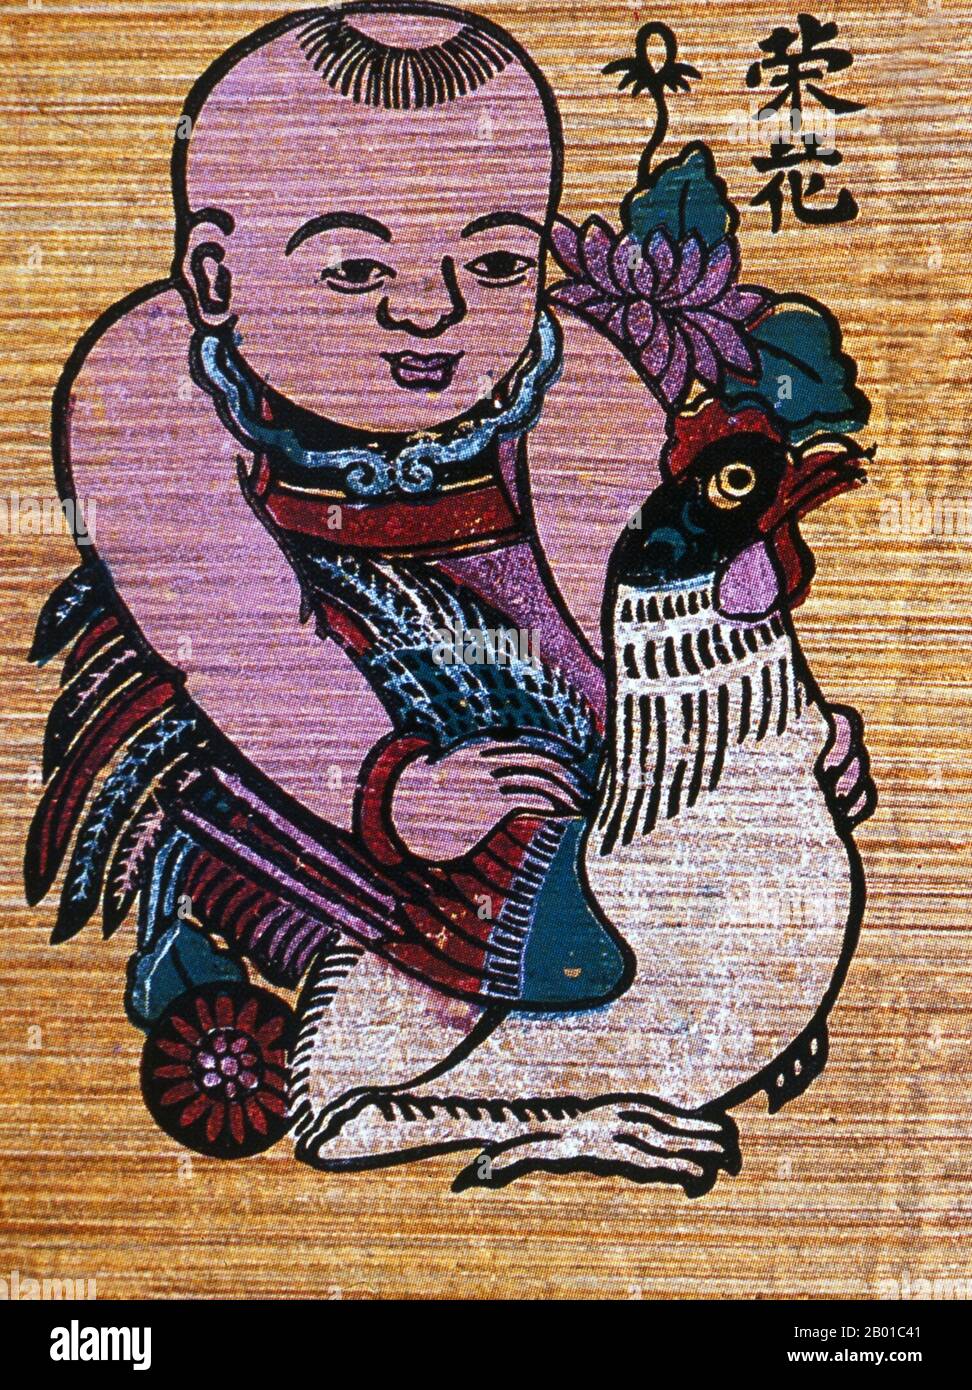 Vietnam: Child with domestic fowl - traditional woodblock painting from Dong Ho village, Bac Ninh Province.  Dong Ho painting (Vietnamese: Tranh Đông Hồ or Tranh làng Hồ), full name Dong Ho folk woodcut painting (Tranh khắc gỗ dân gian Đông Hồ) is a genre of Vietnamese woodcut paintings originating from Dong Ho village (làng Đông Hồ) in Bac Ninh Province, Vietnam.  Using the traditional điệp paper and colours derived from nature, craftsmen print Dong Ho pictures of different themes from good luck wishes, historical figures to everyday activities and folk allegories. Stock Photo